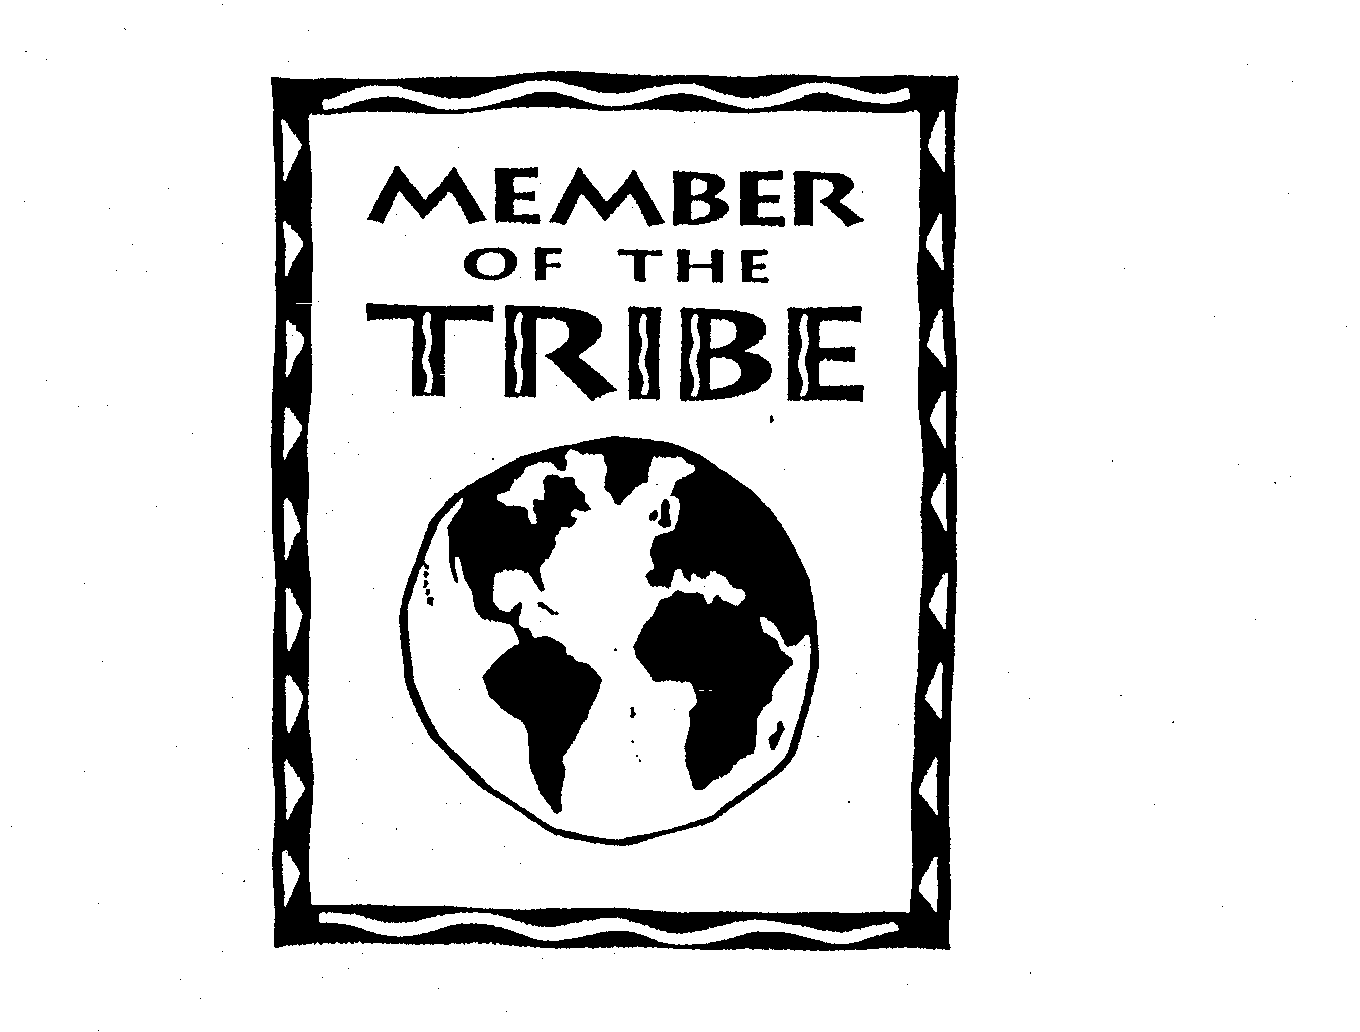 MEMBER OF THE TRIBE